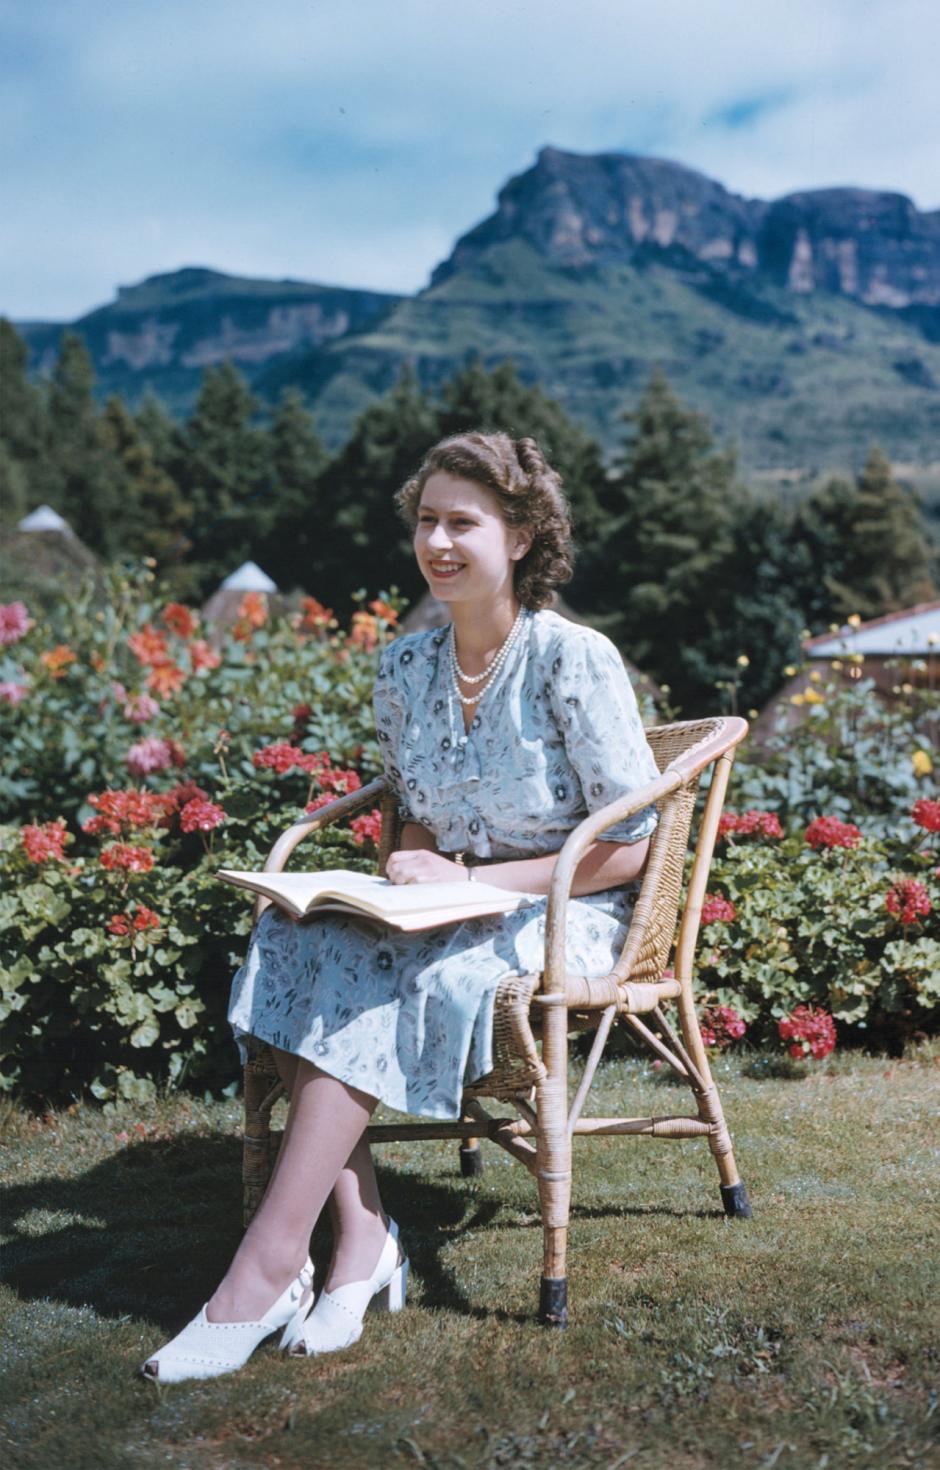 Britain's Princess Elizabeth, later Queen Elizabeth II, on her 21st birthday, seated in Natal National Park, South Africa, April 21, 1947. In the background are the Drakenberg Mountains.